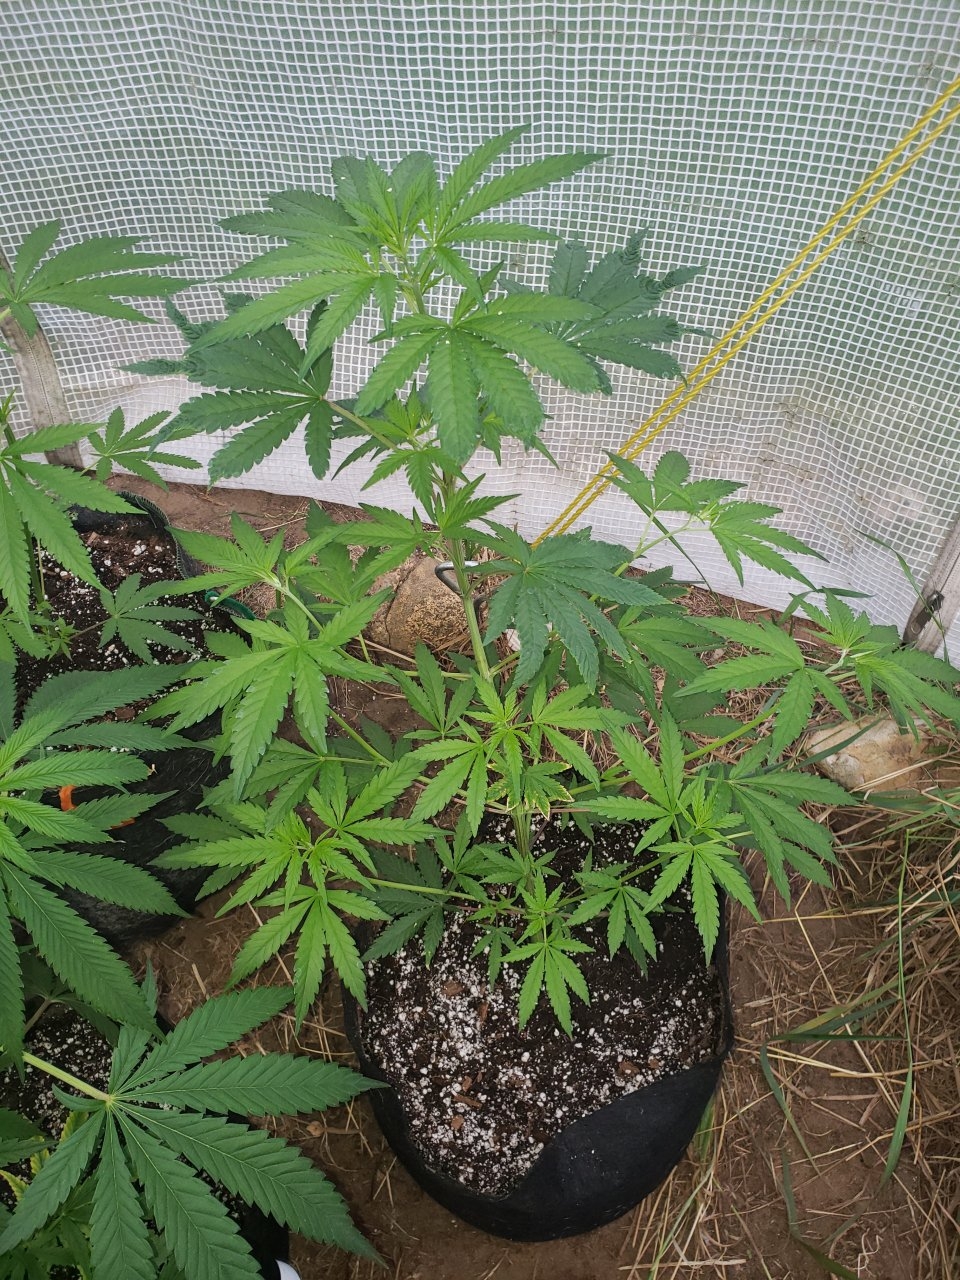 I think also a GSC clone outdoor